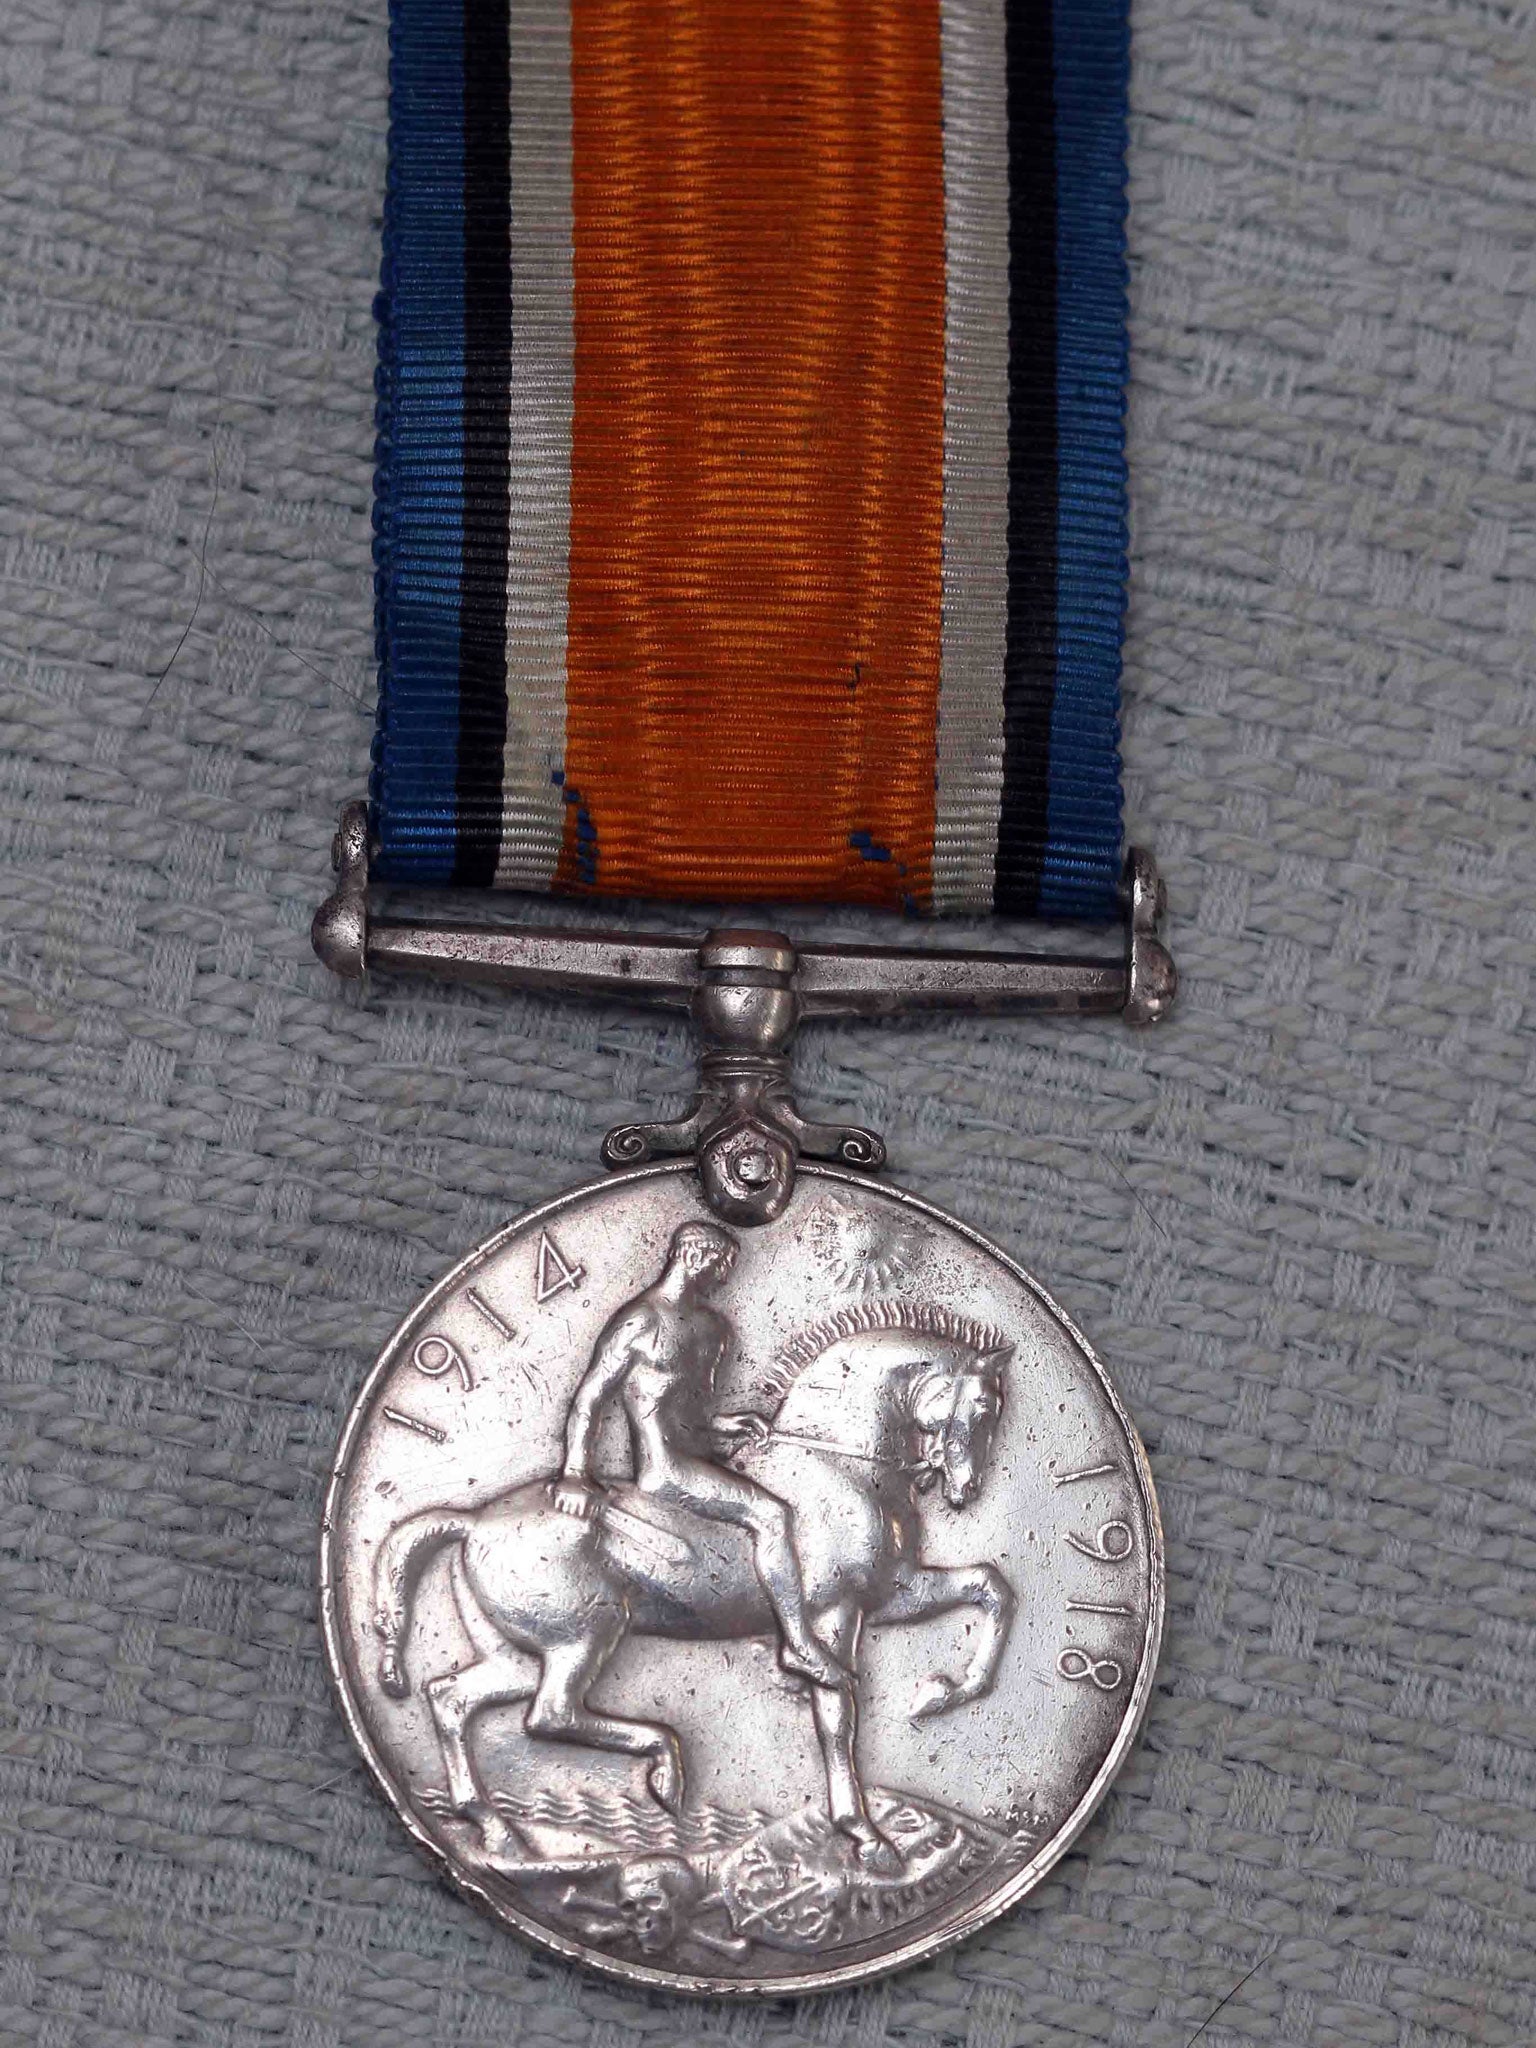 Security experts warn that increasing interest has driven up price of medals on online auction sites